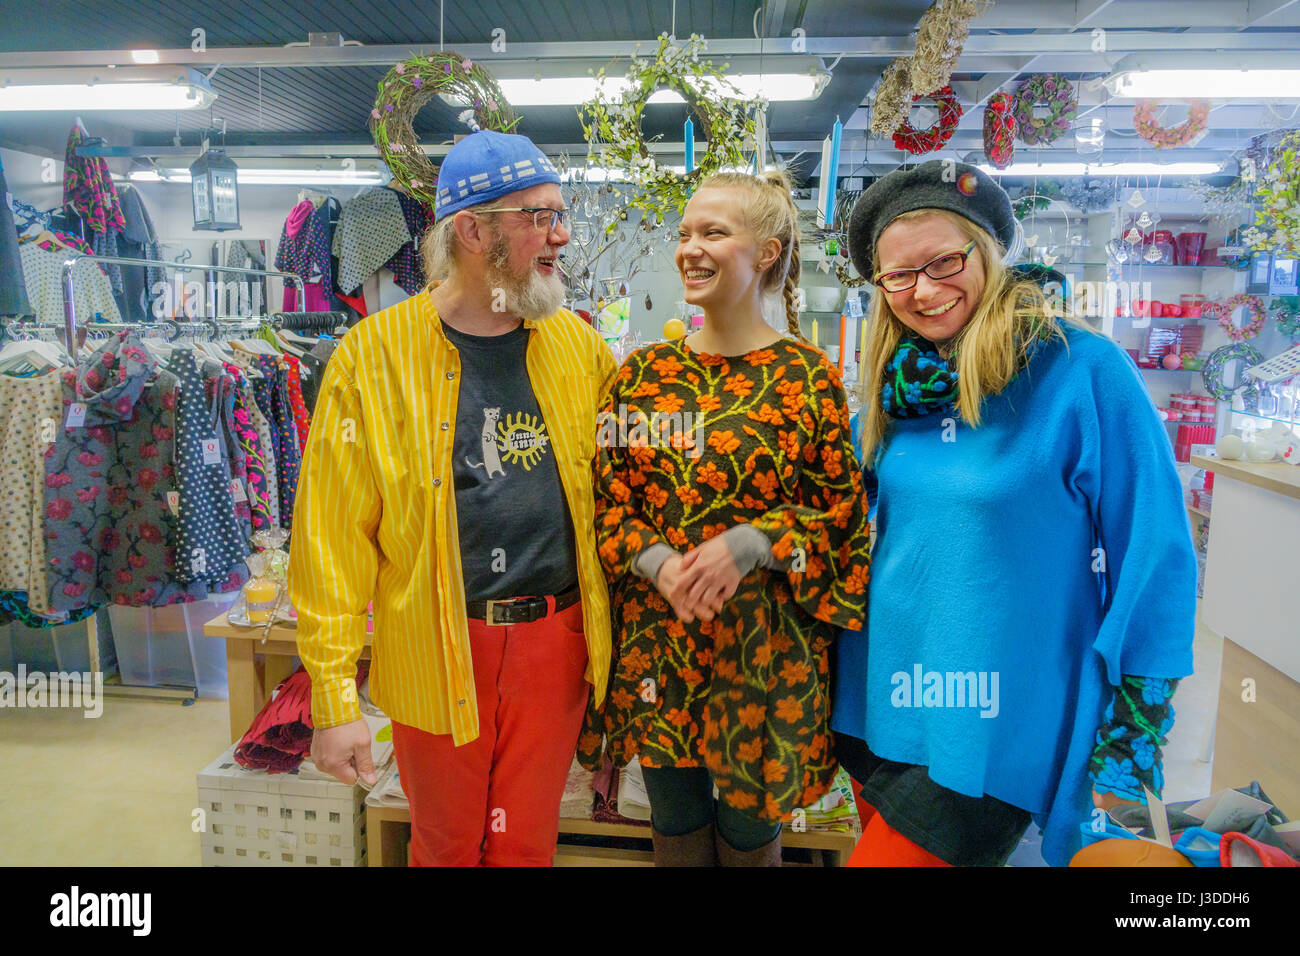 People in a shop, Lapland, Finland Stock Photo